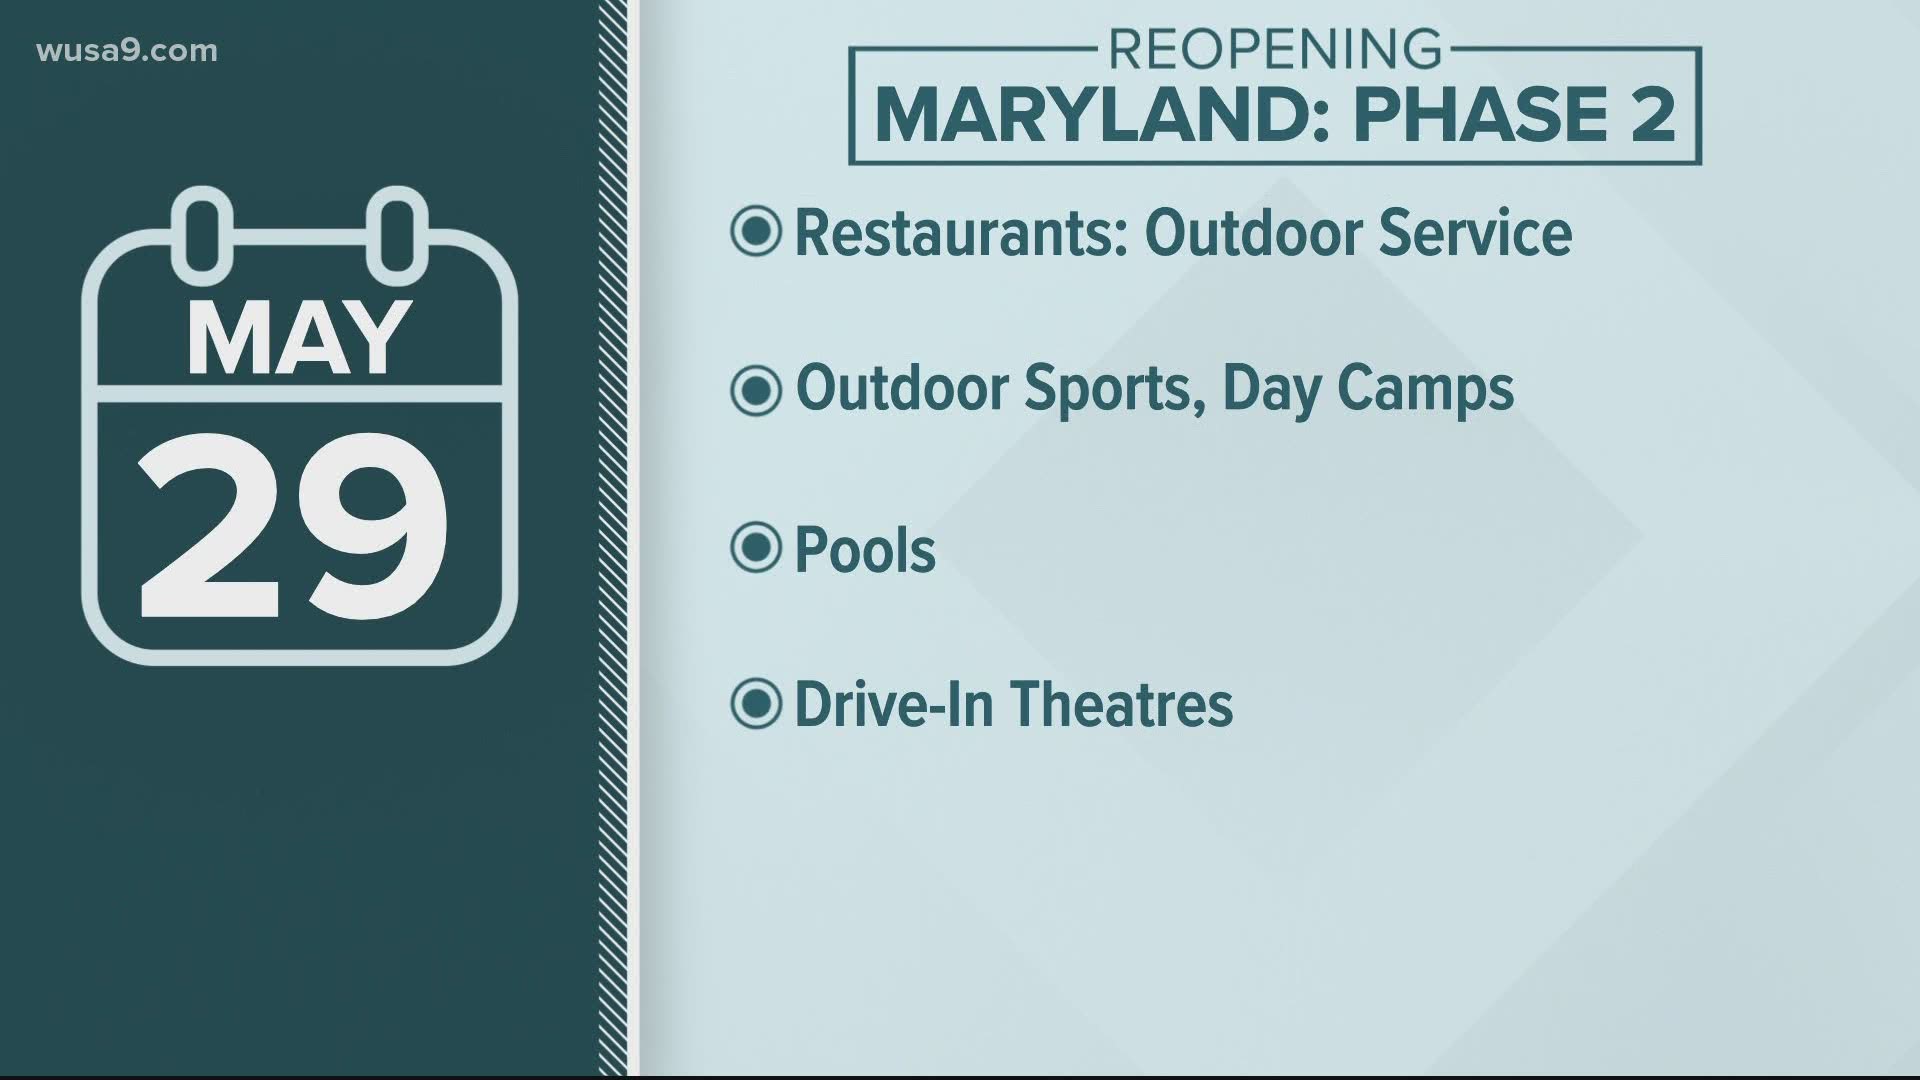 Outdoor dining, youth camps, sports and pools can all reopen Friday, May 29 at 5 p.m. with restrictions.